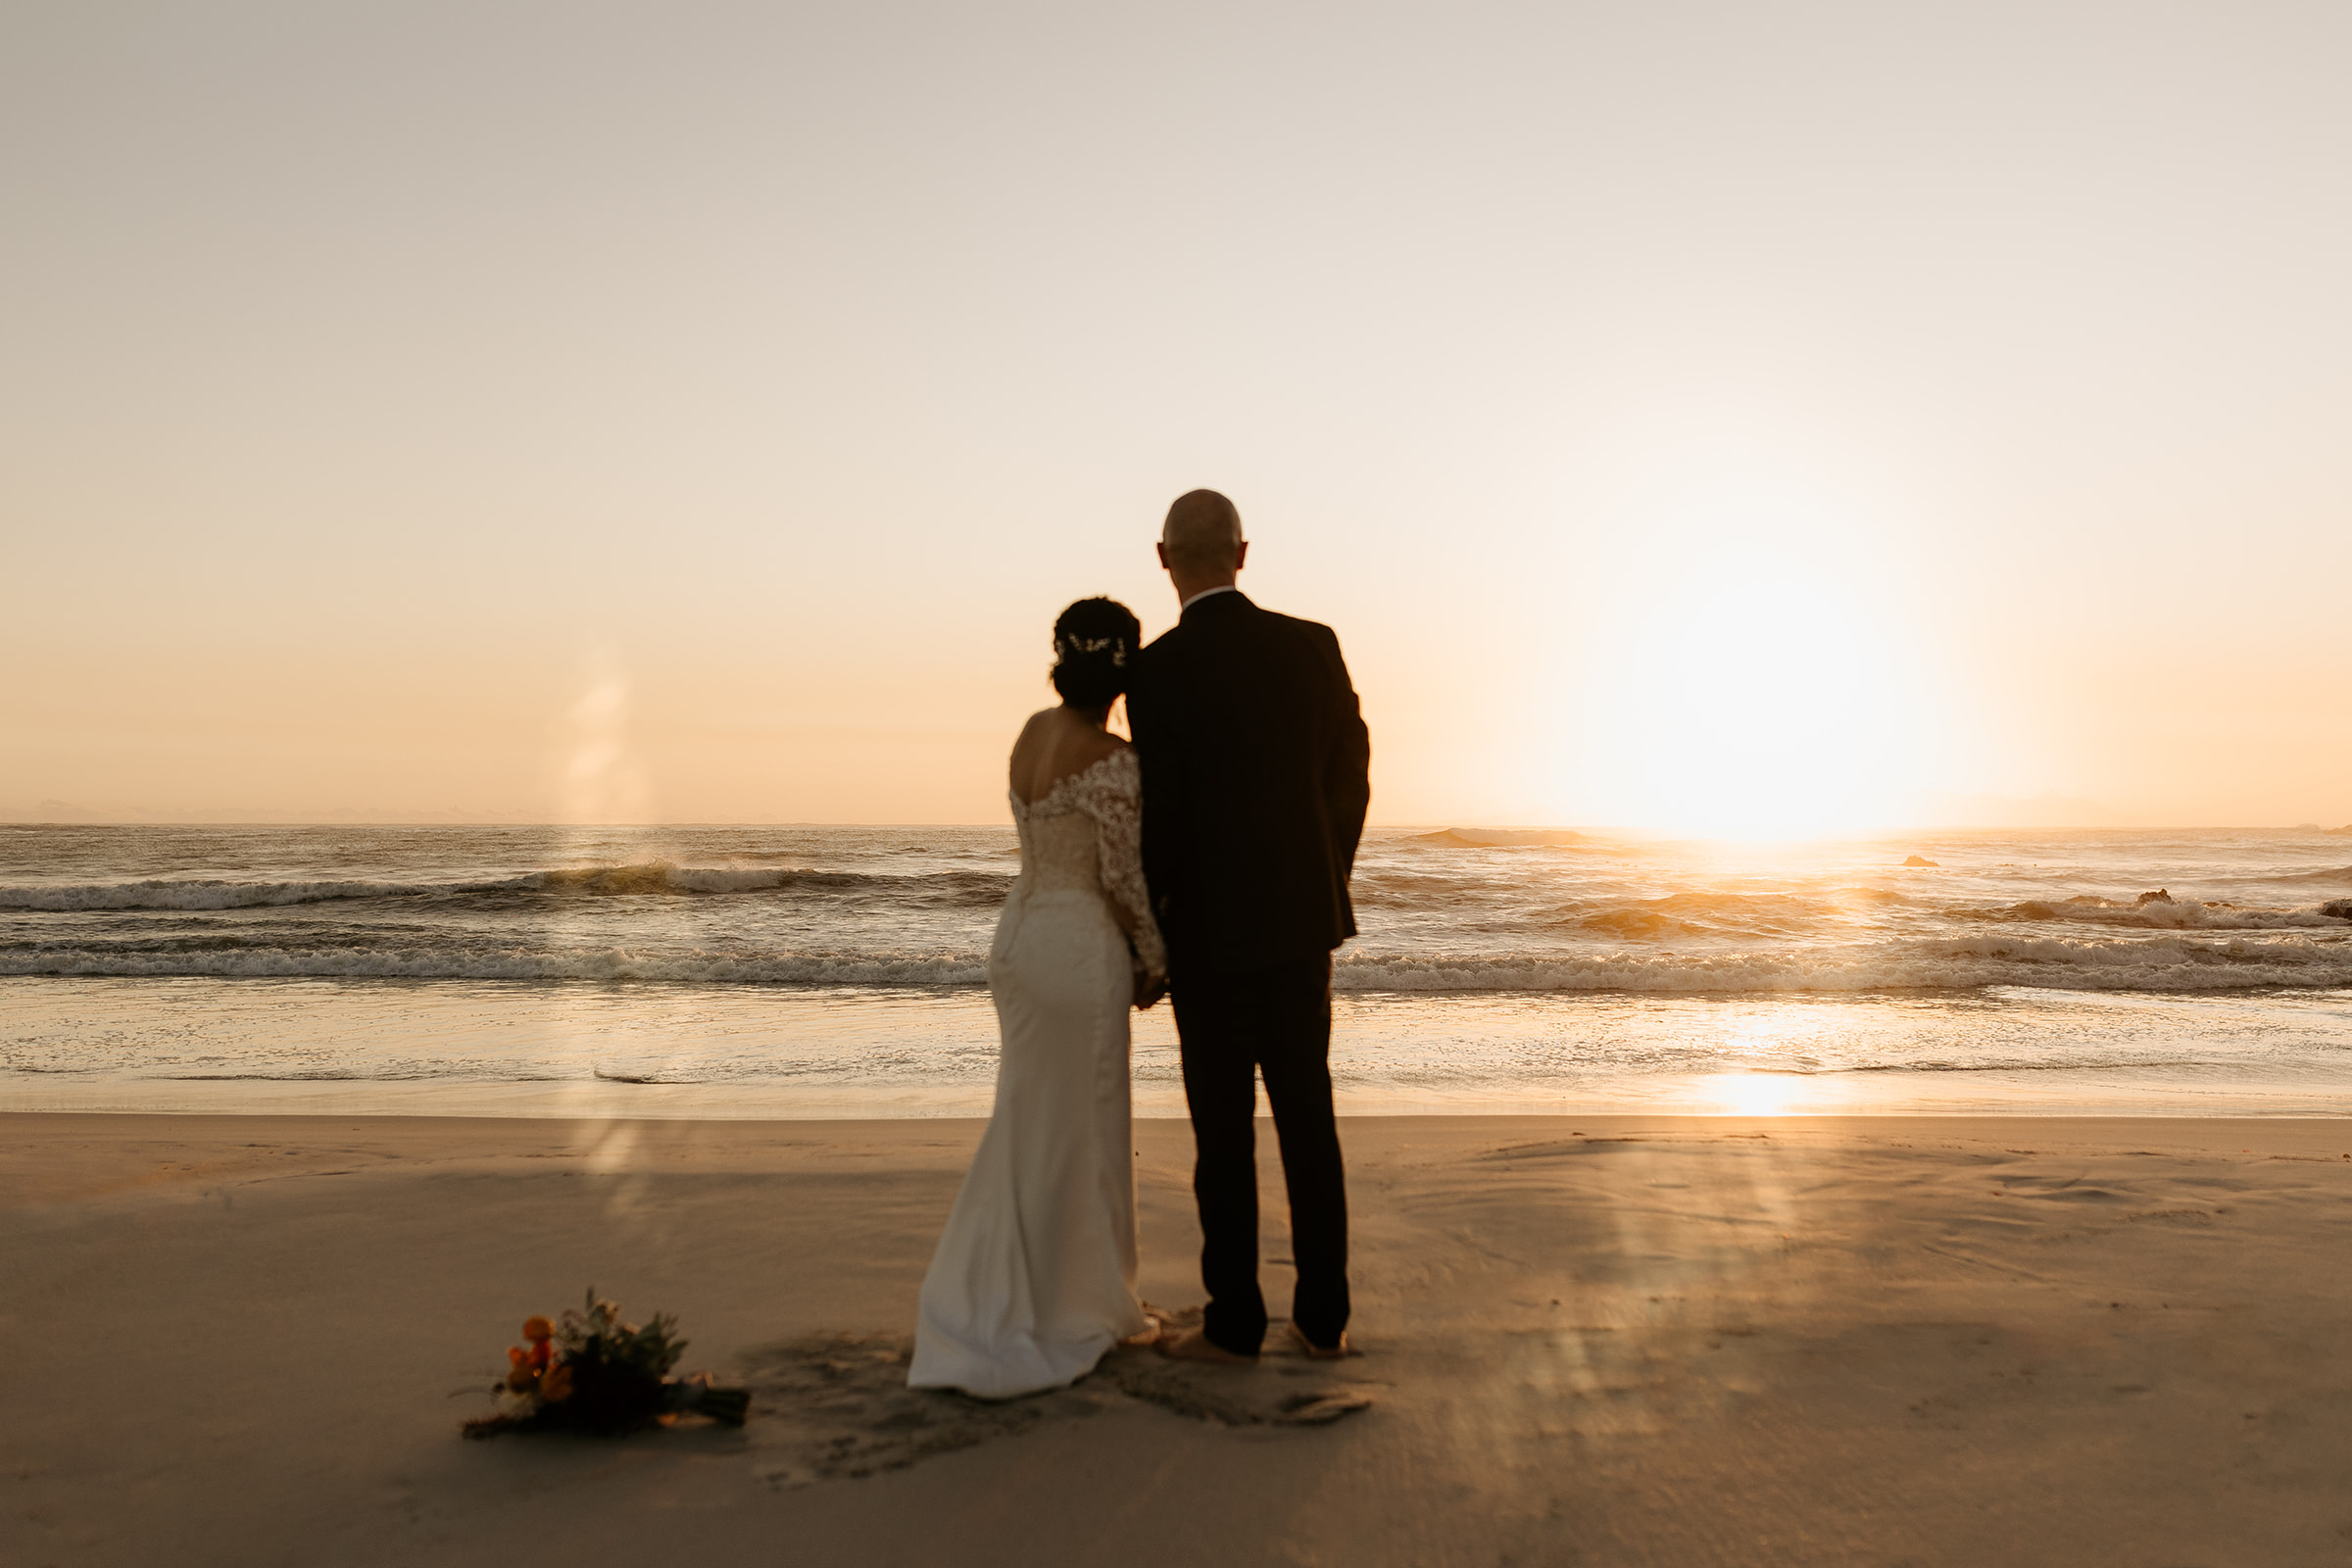 A couple who had an intimate wedding in Pringle Bay together on the beach at sunset